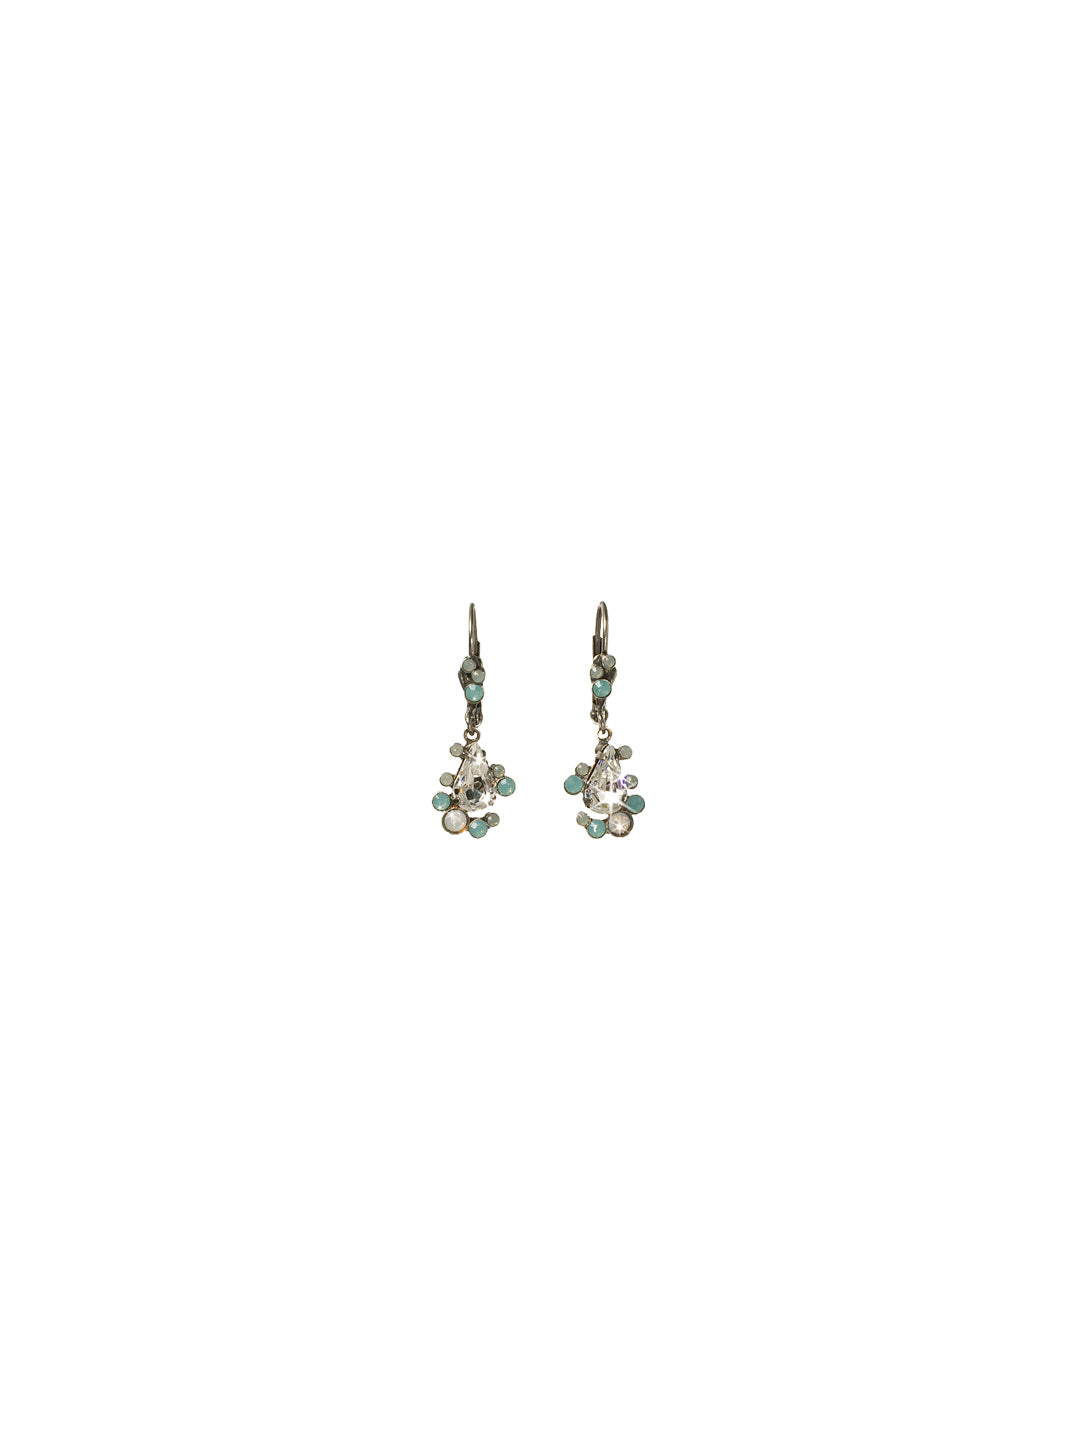 ECB38 Dangle Earrings - ECB38ASAES - <p>The ECB38 Earrings are a simple, yet galmorous look. From Sorrelli's Aegean Sea collection in our Antique Silver-tone finish.</p>